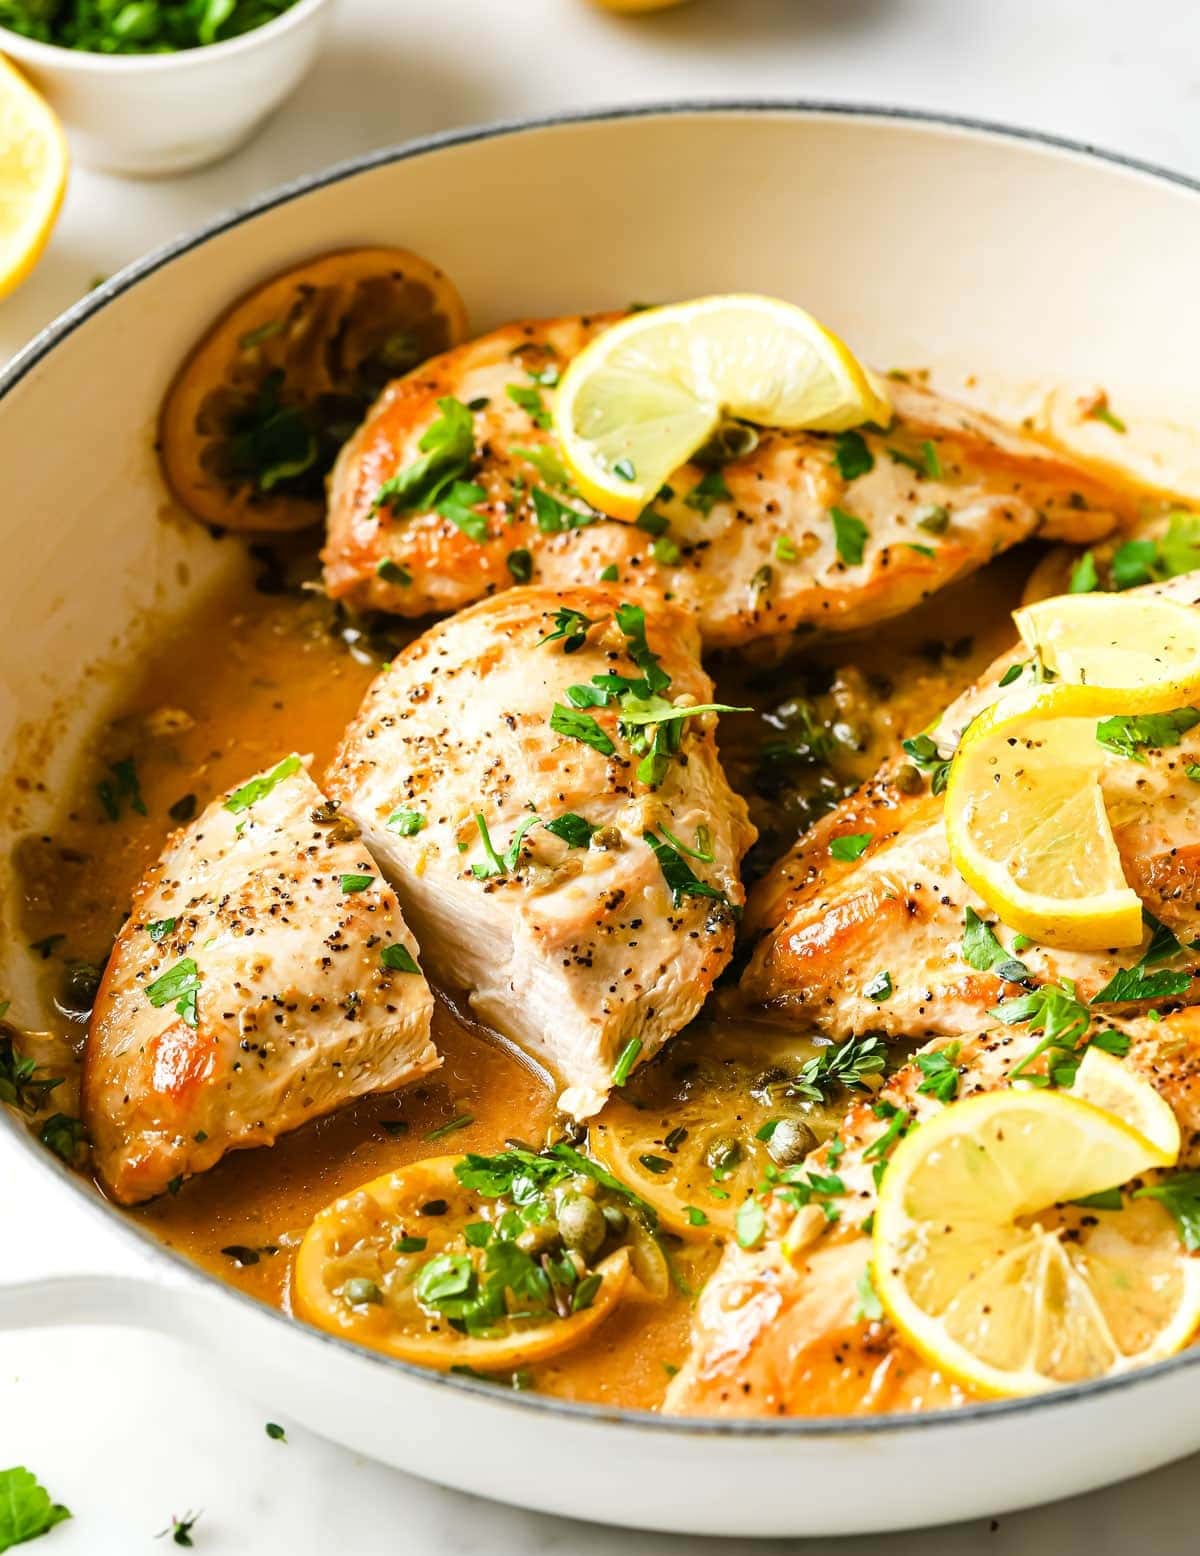 Chicken with lemon slices and creamy sauce garnished with cilantro and spices. 